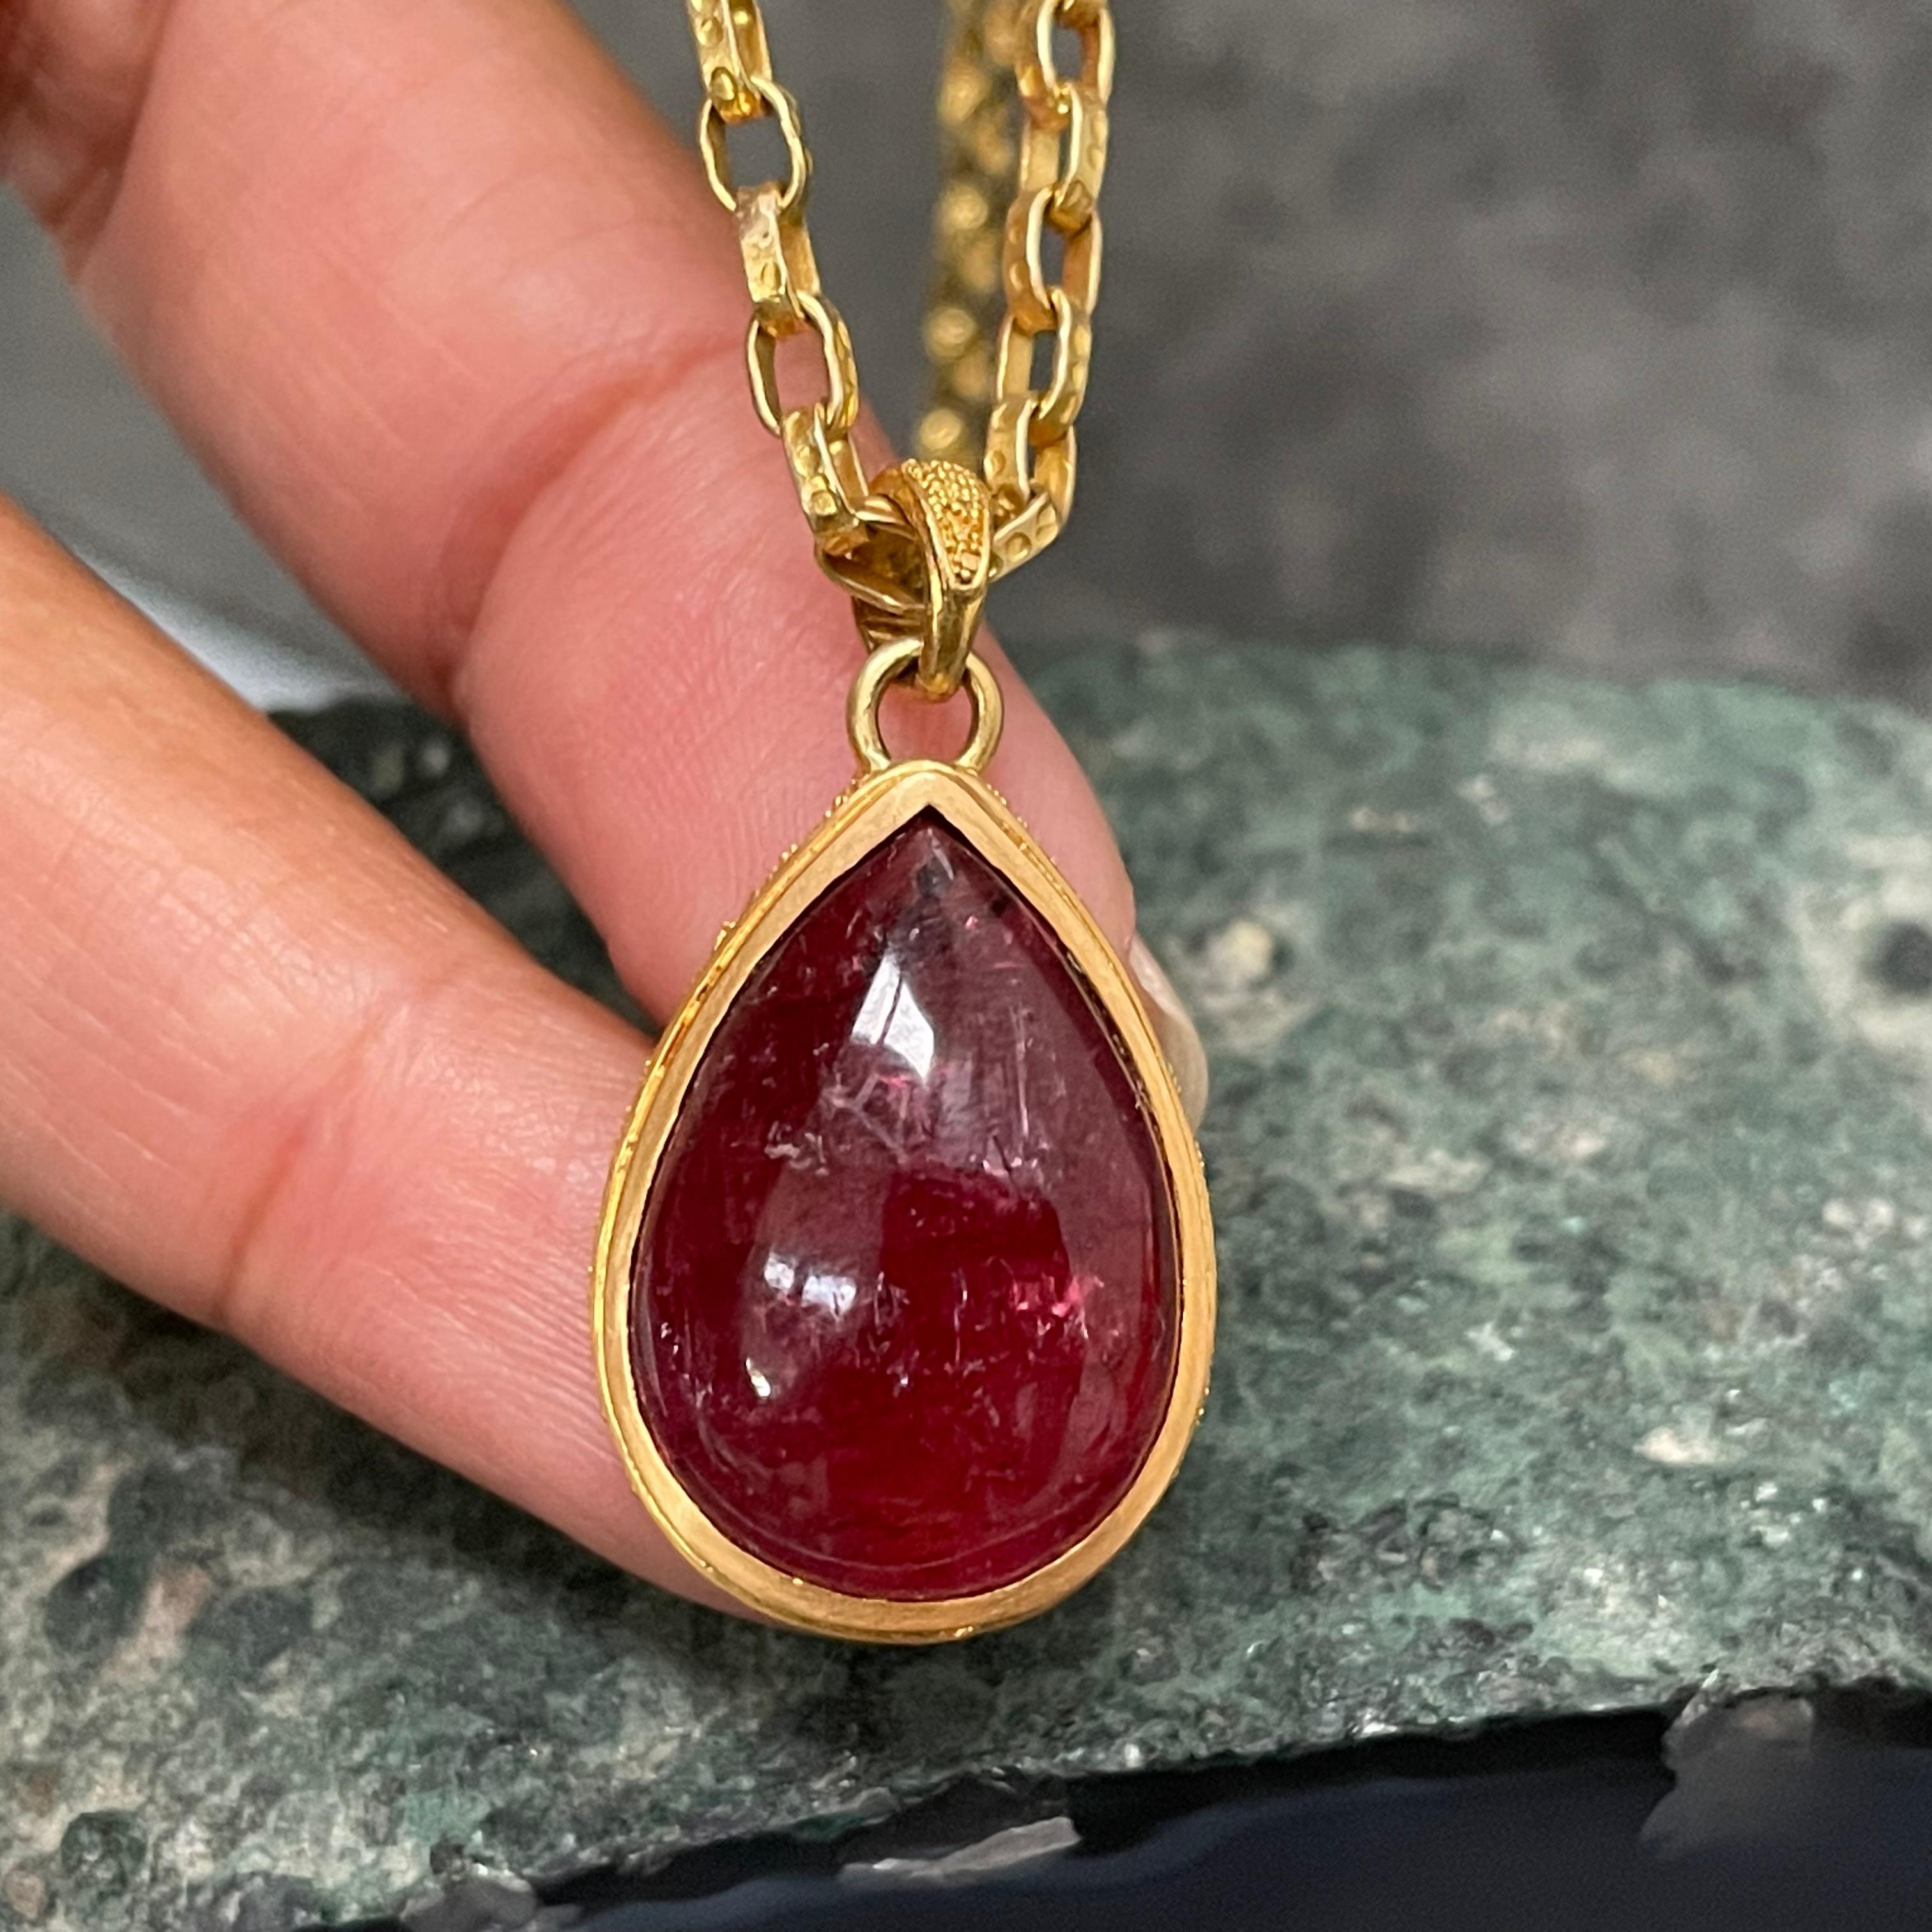 A substantial deep reddish-pink 13 x1 9 mm pear shaped tourmaline cabochon is held in a complementary 22K gold setting with fine 